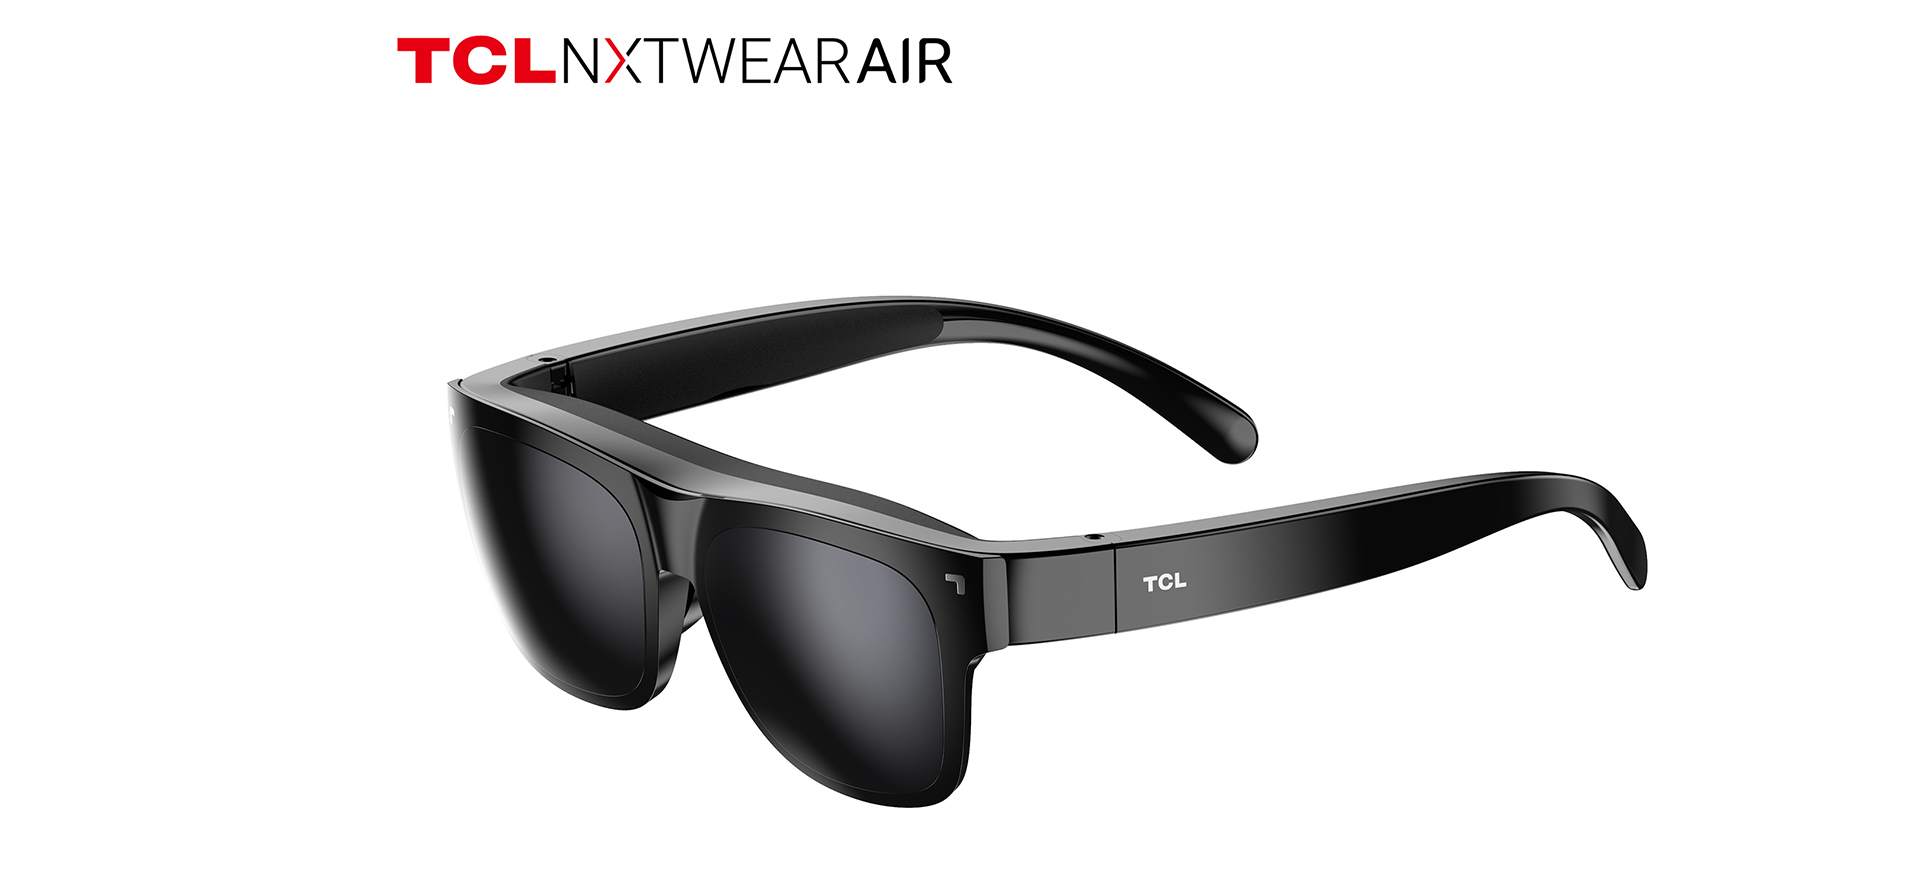 TCL Unveils Portable, Lightweight and Personal NXTWEAR AIR